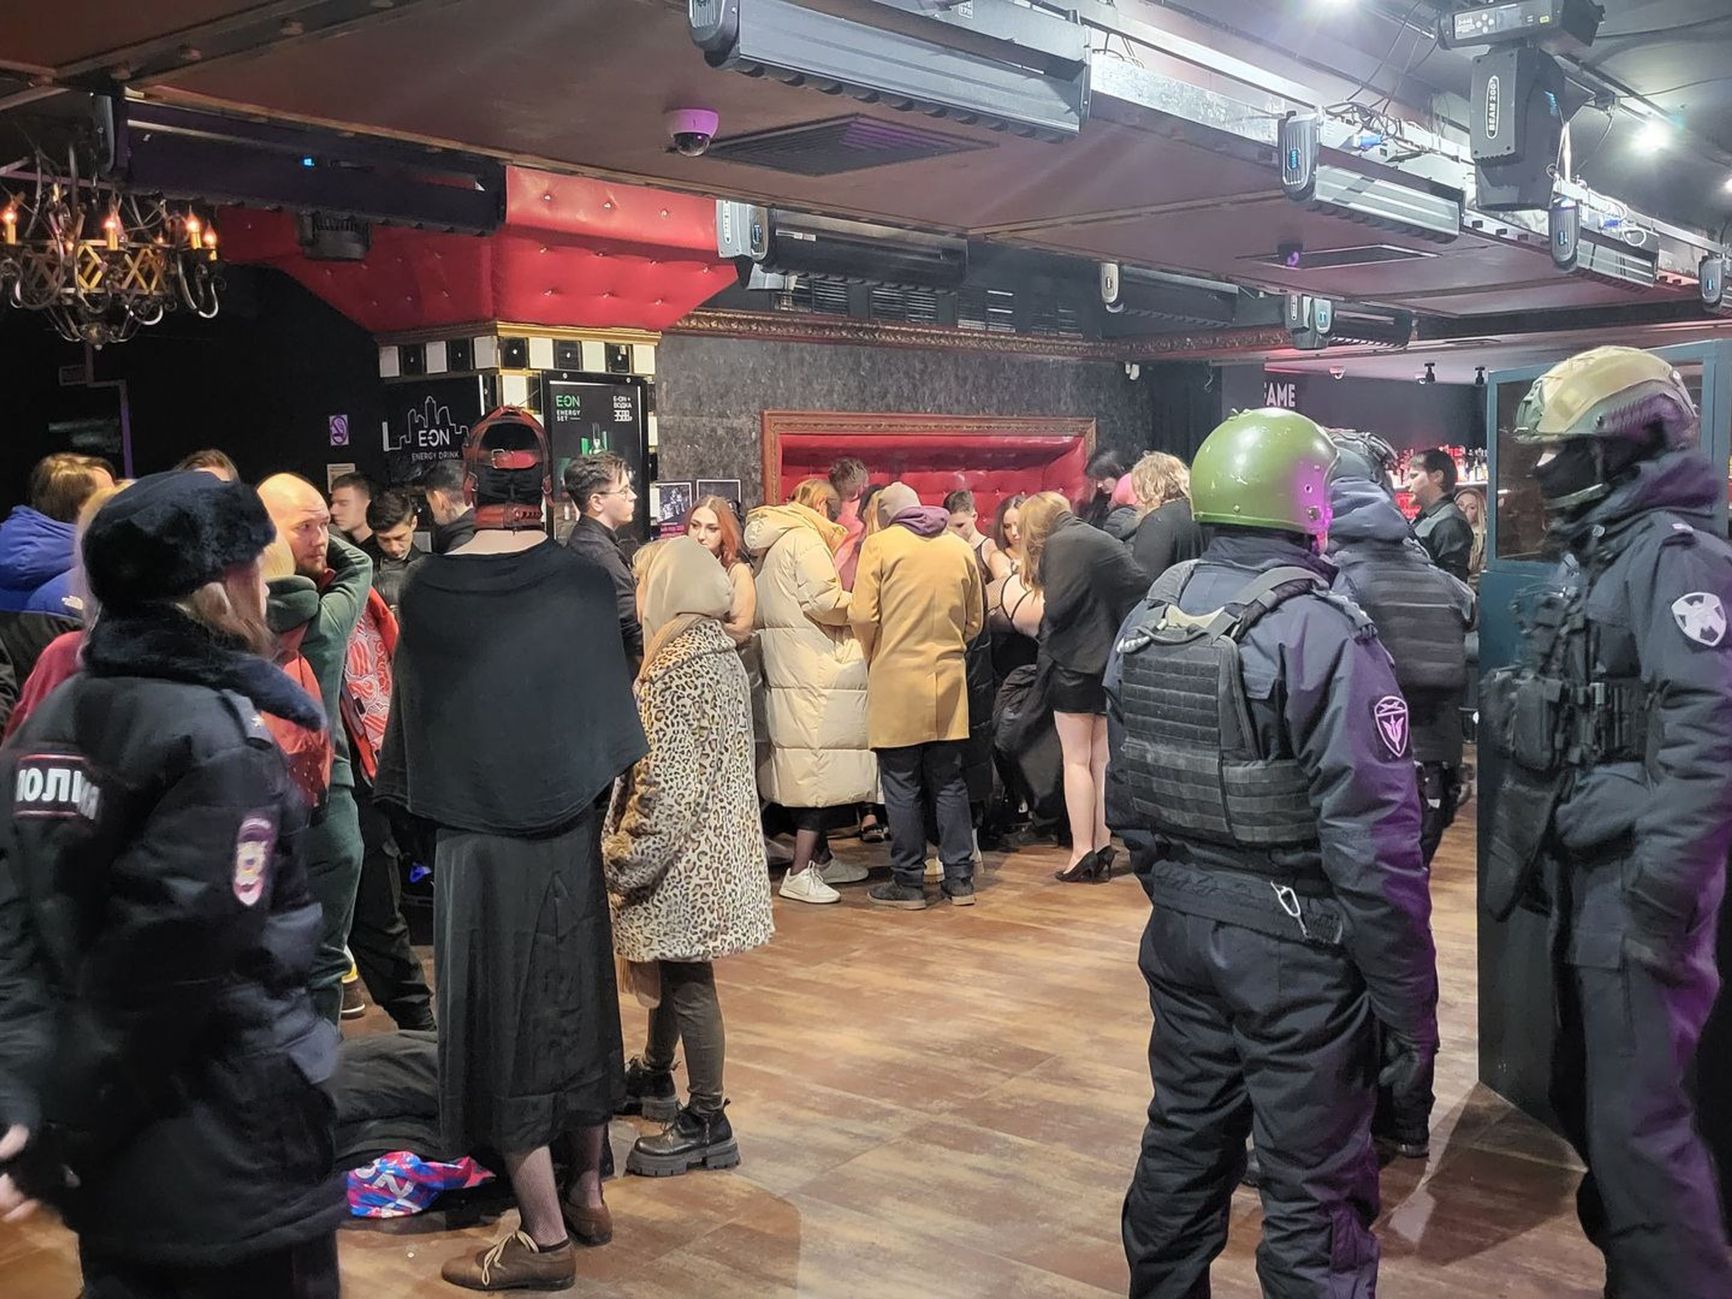 The Fame club in Yekaterinburg being raided by the police